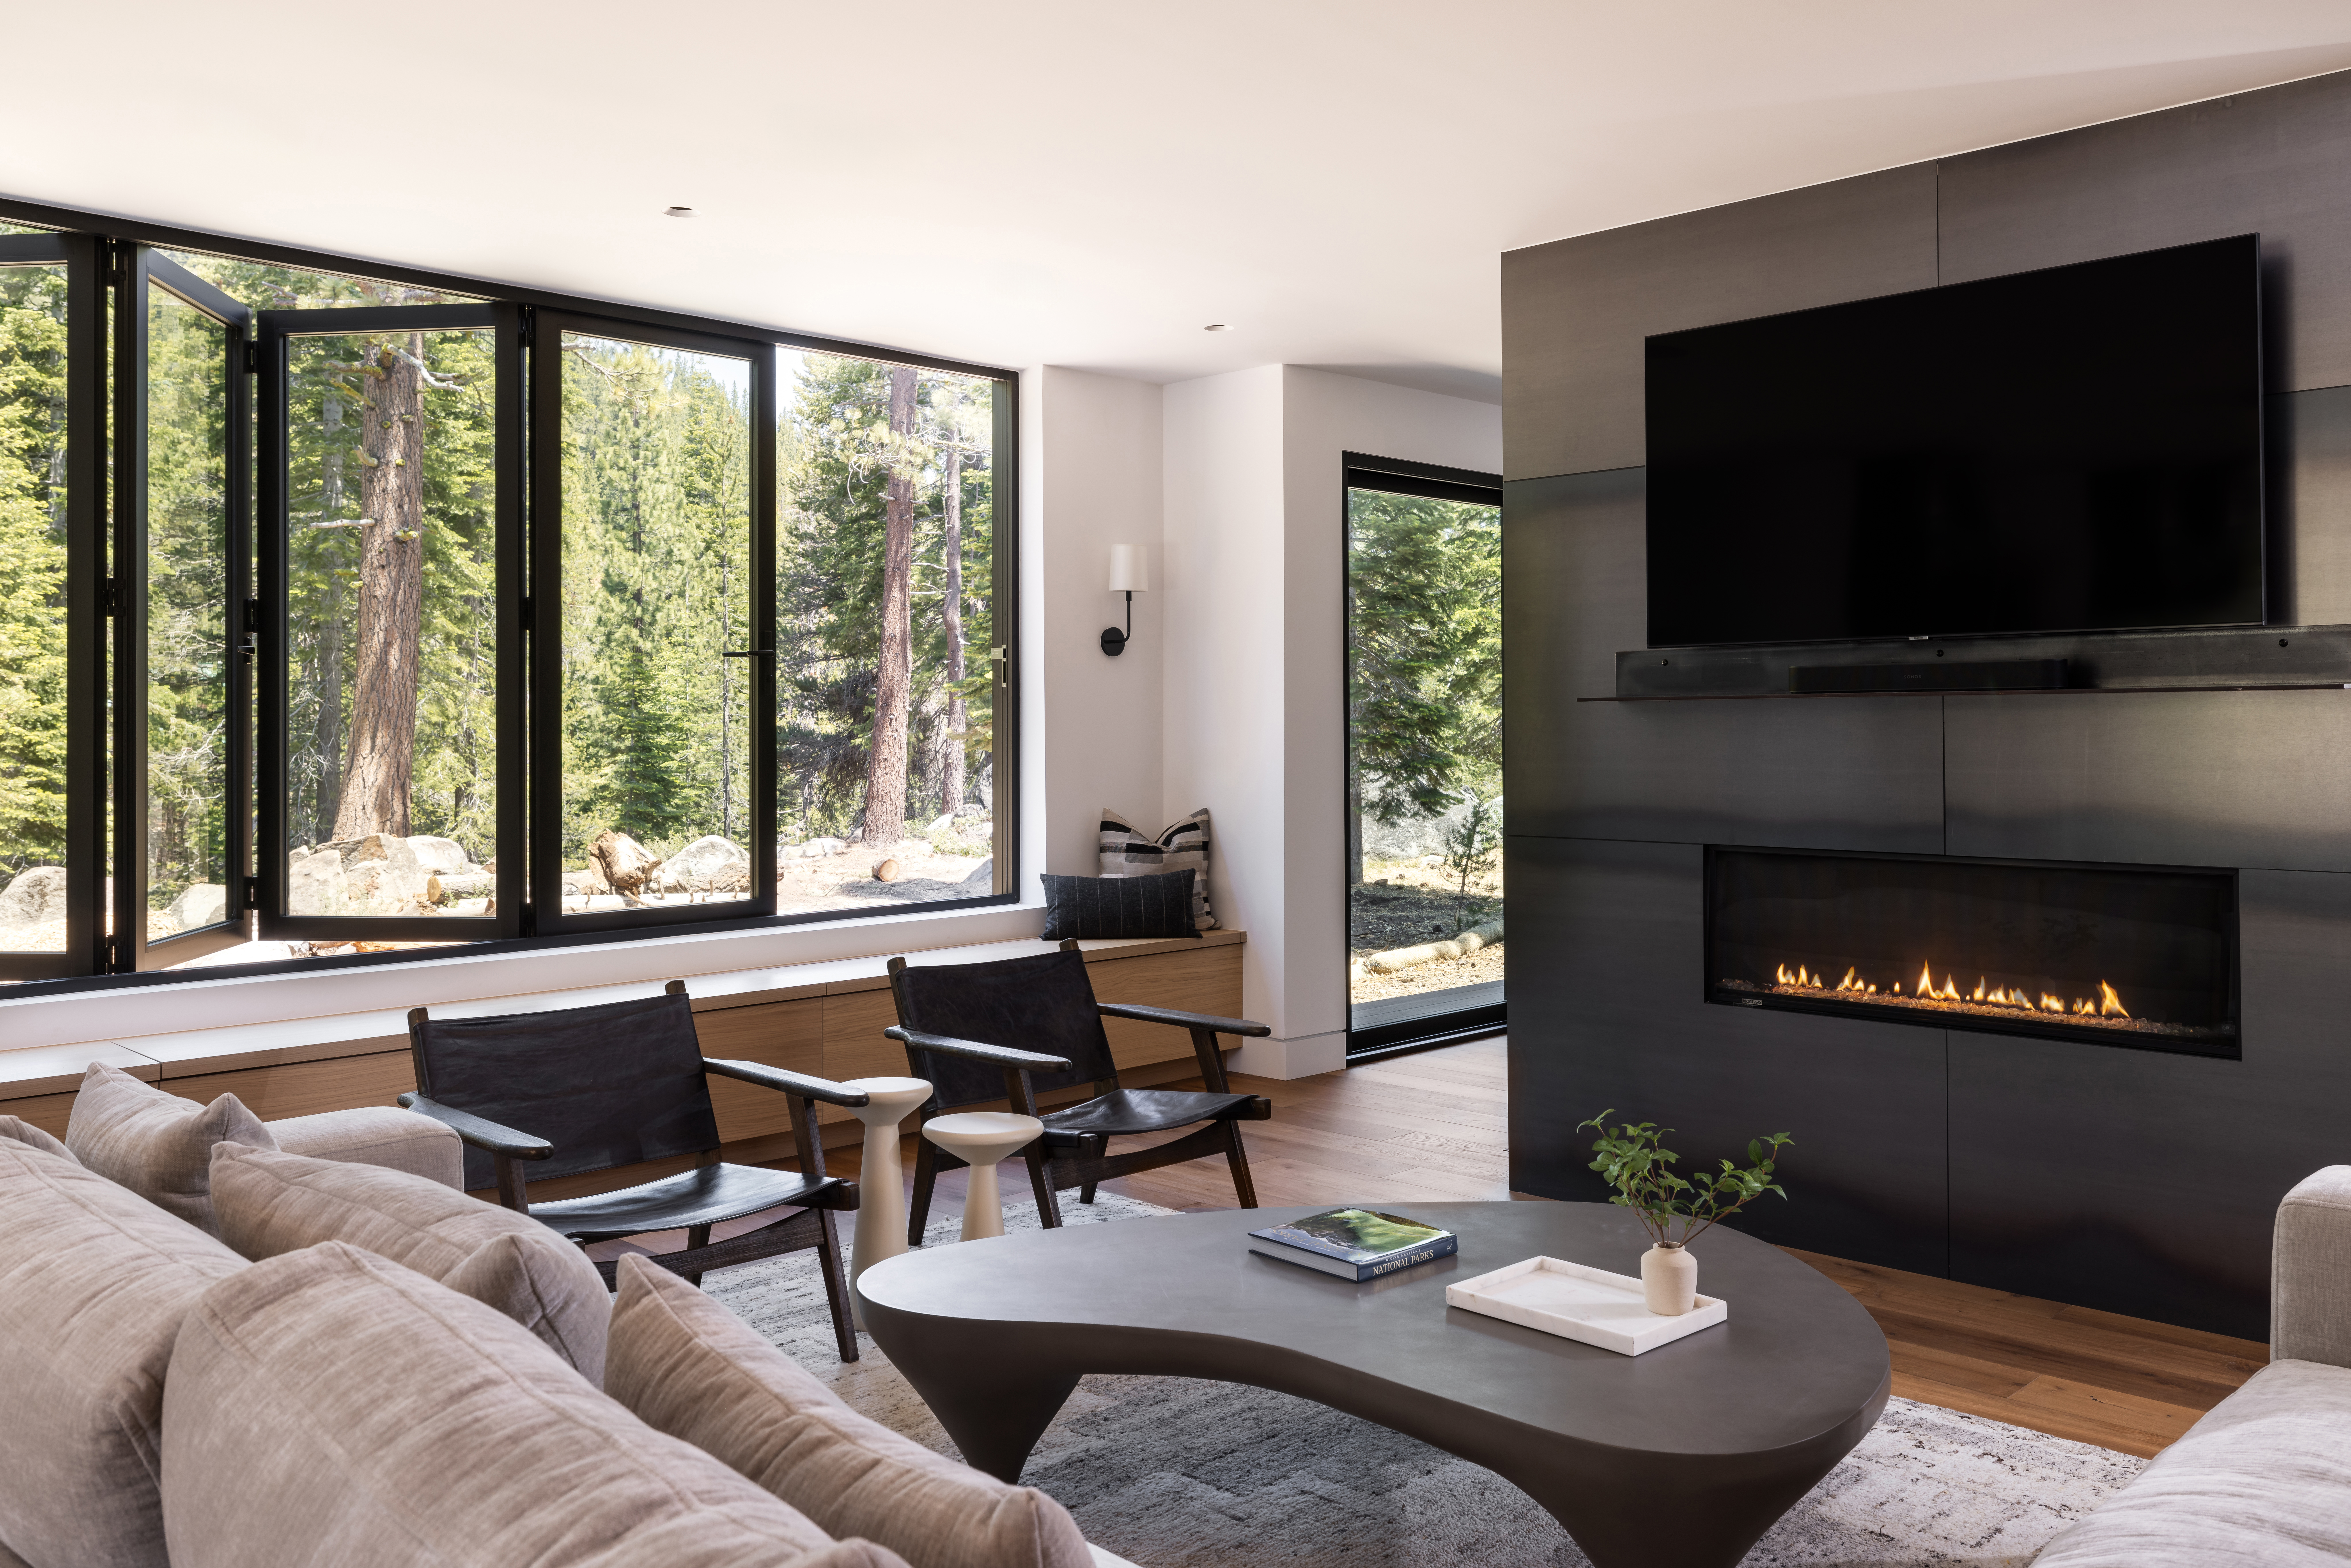 A contemporary living room of an Olympic Valley second home featuring a fireplace and expansive windows, offering ample natural light and stunning views.